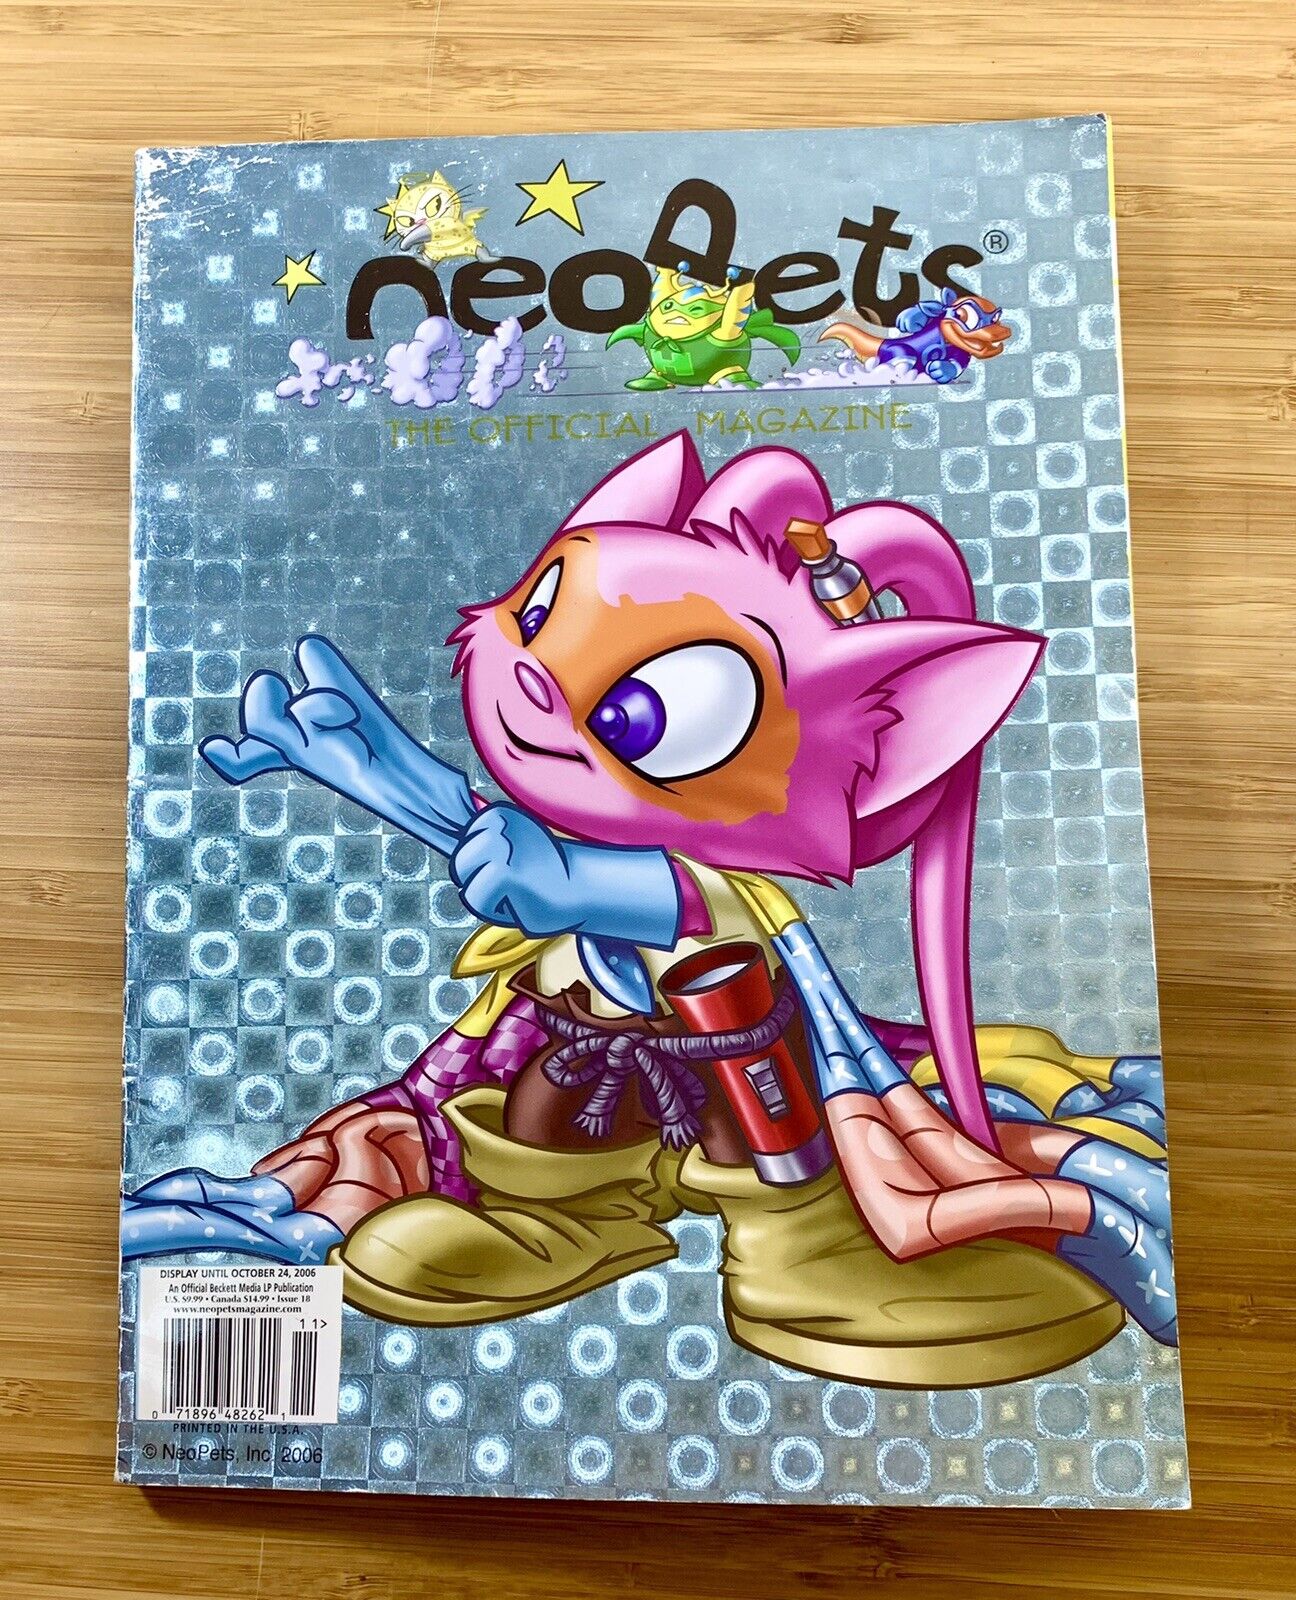 Neopets Magazine Issue 18 (2006) Beckett Cherise Collectible Has Defect